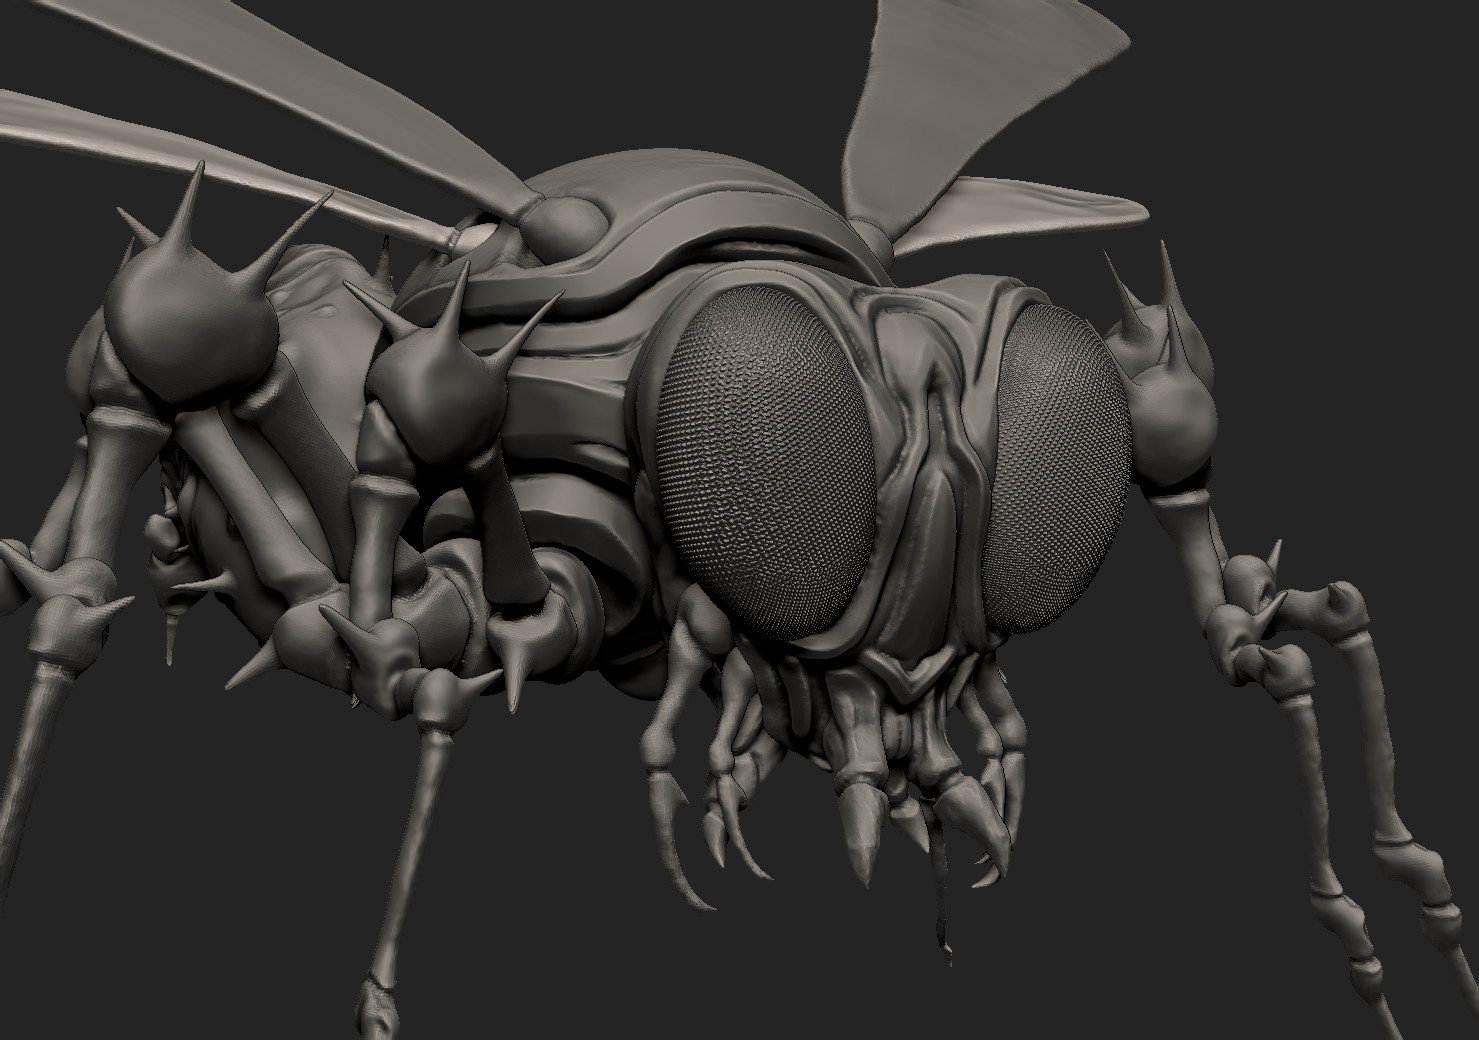 ZBrush Render: Insect Head Close Up